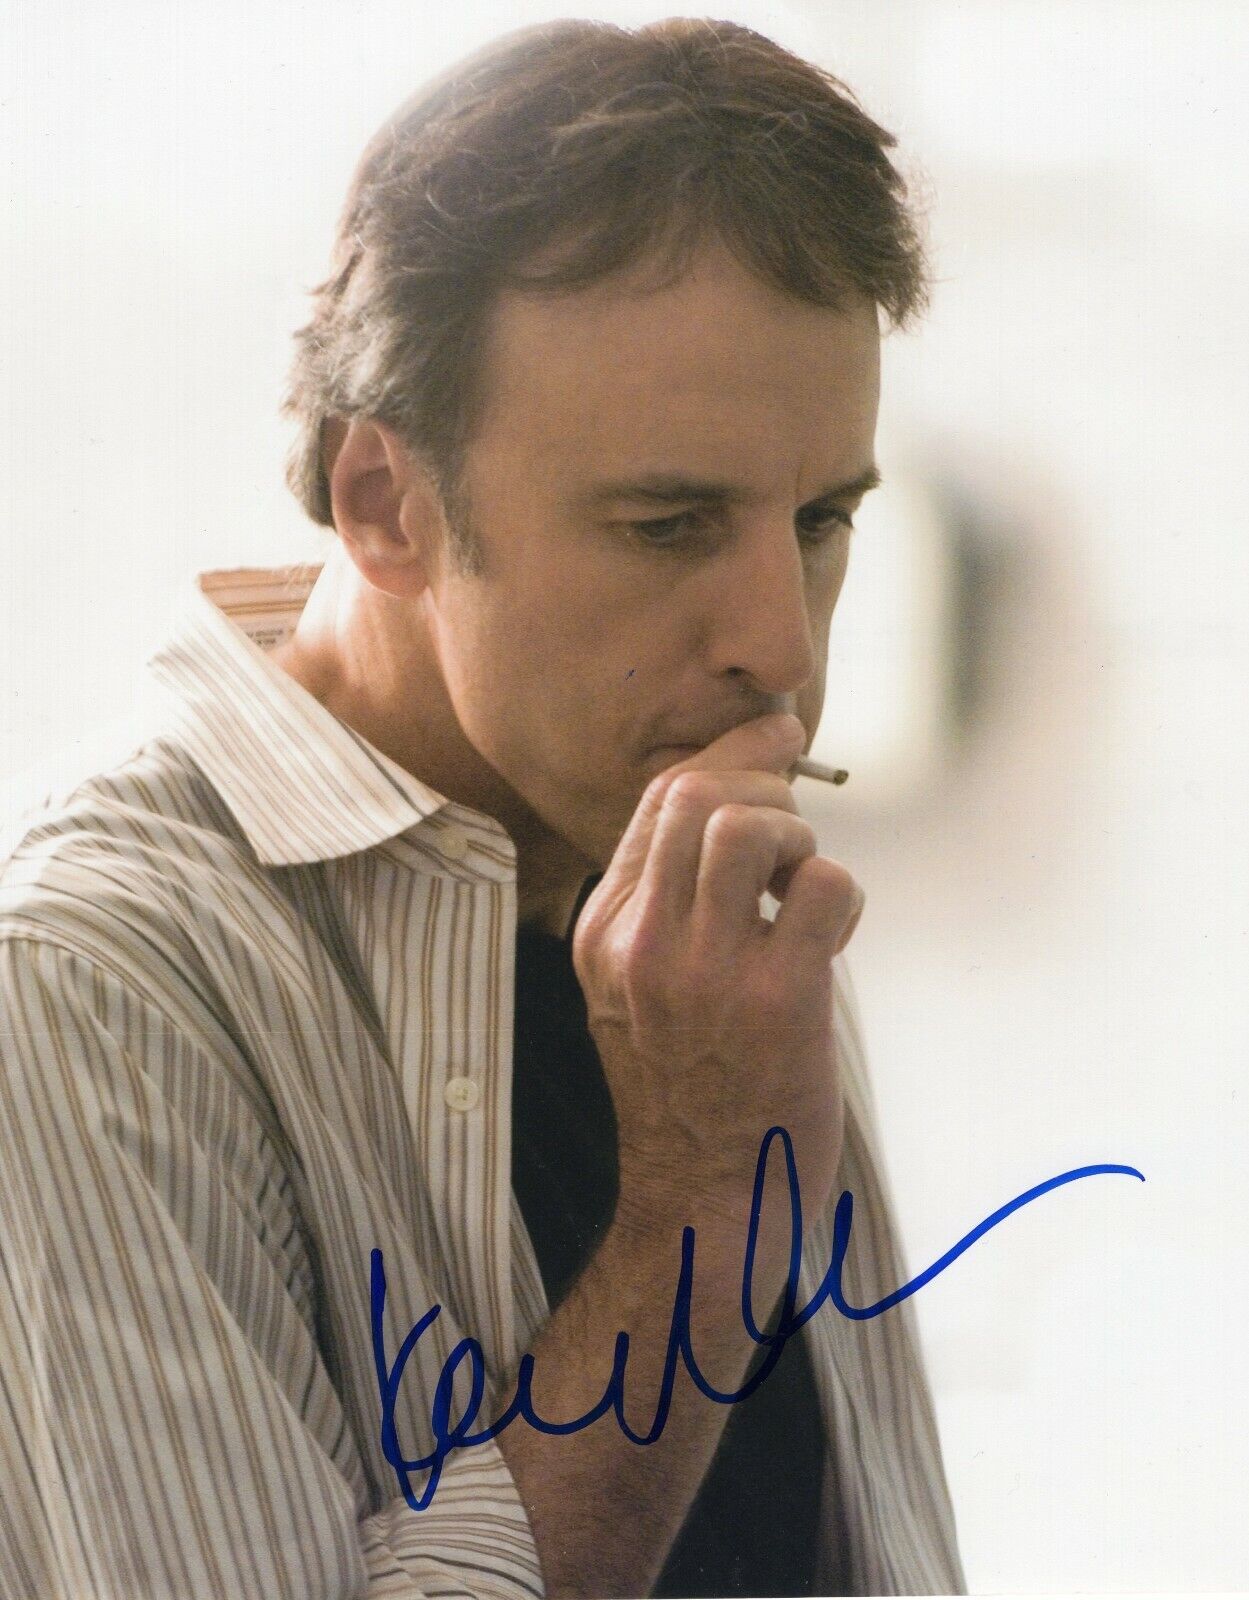 Kevin Nealon Signed 8x10 Photo Poster painting w/COA Comedian Actor Saturday Night Live Weeds #1